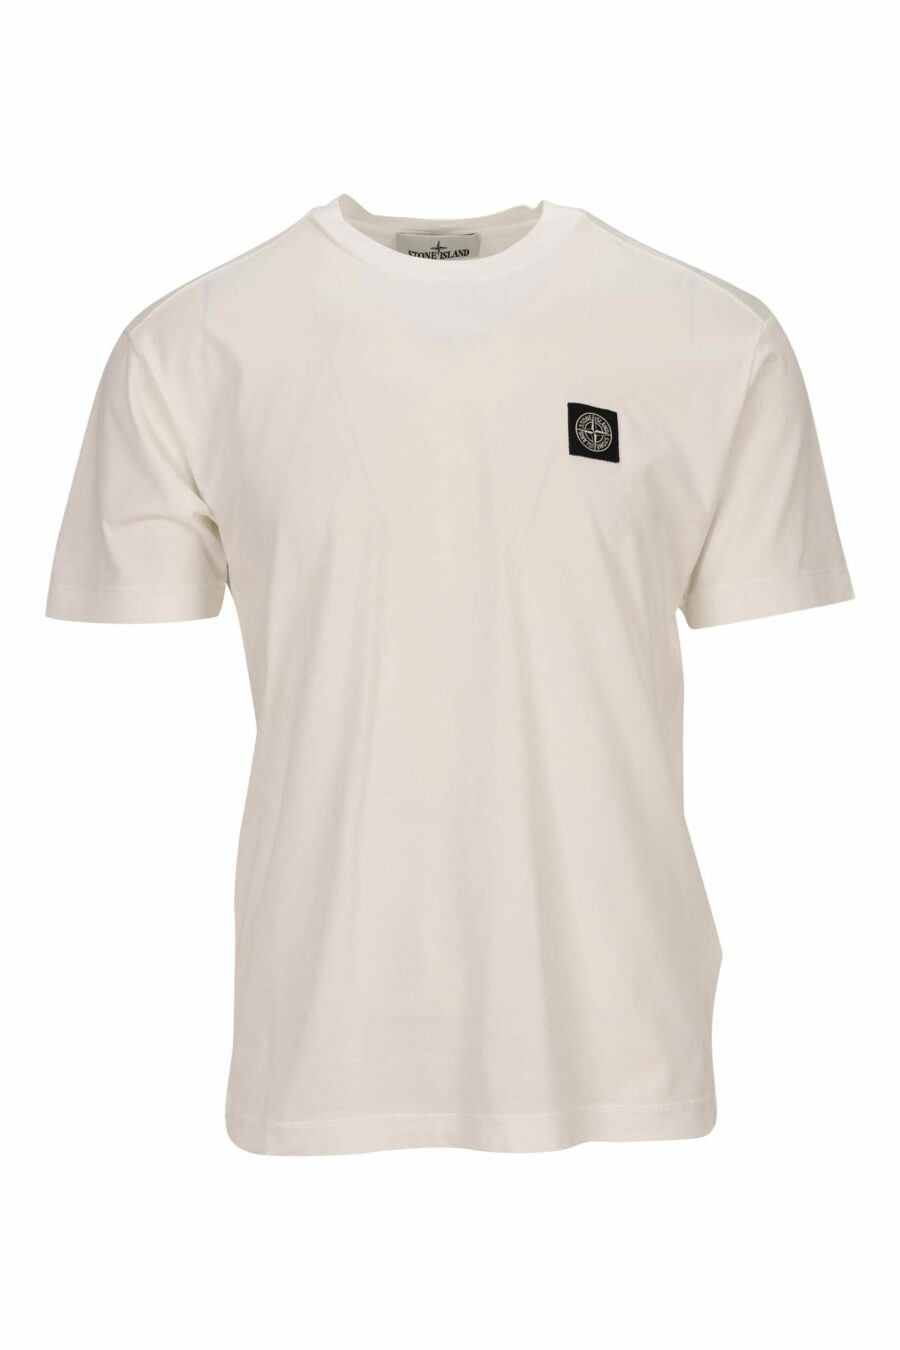 White T-shirt with mini logo compass patch - 8052572855146 scaled